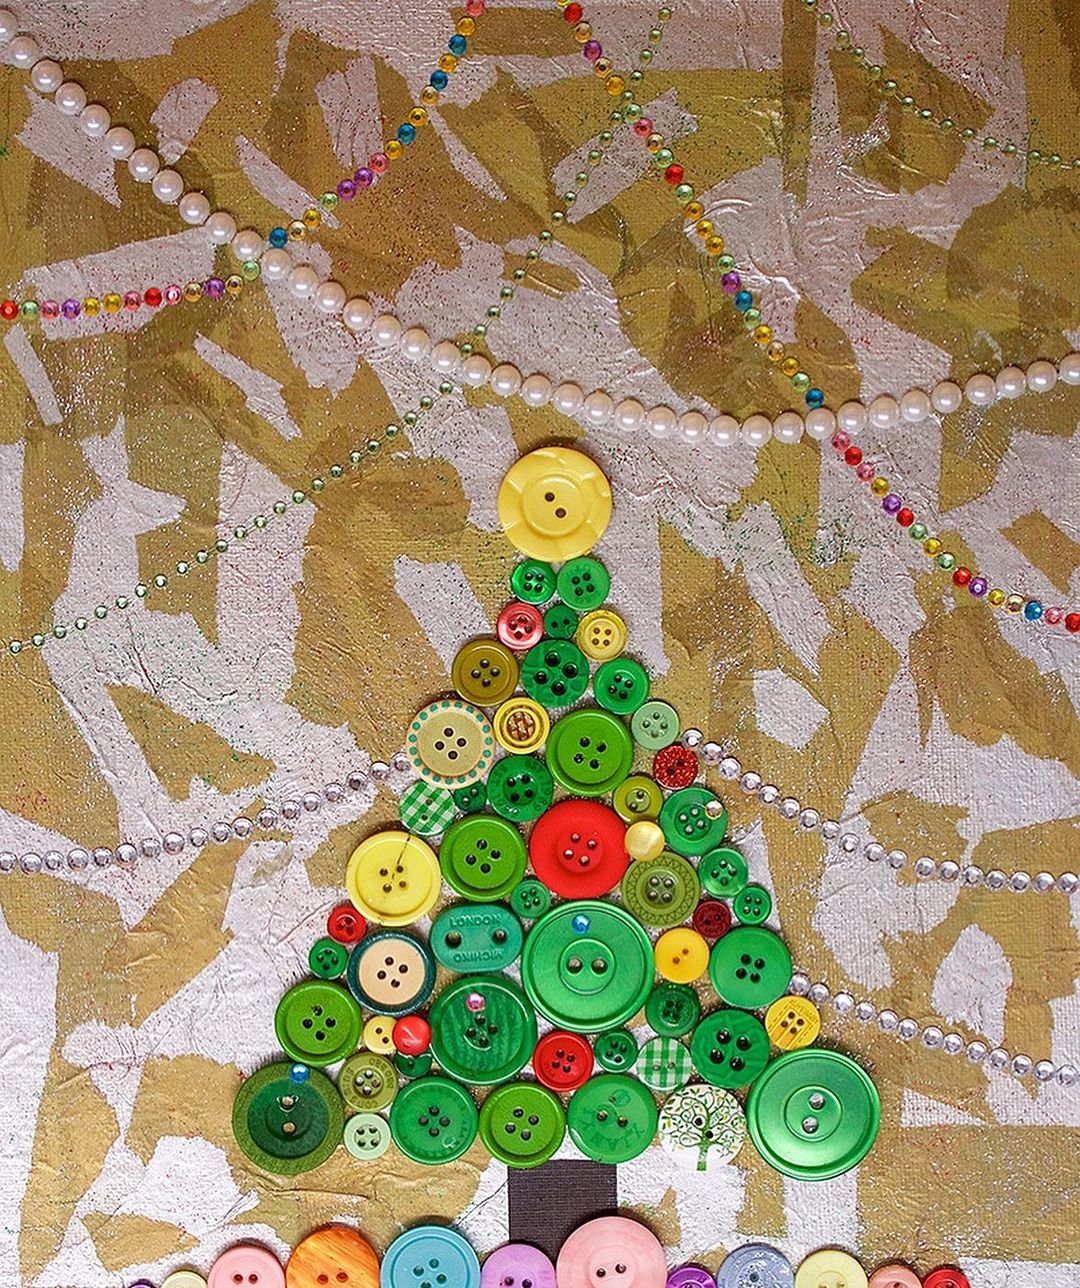 A festive Button Tree decoration, crafted from colorful buttons, perfect for the holiday season.